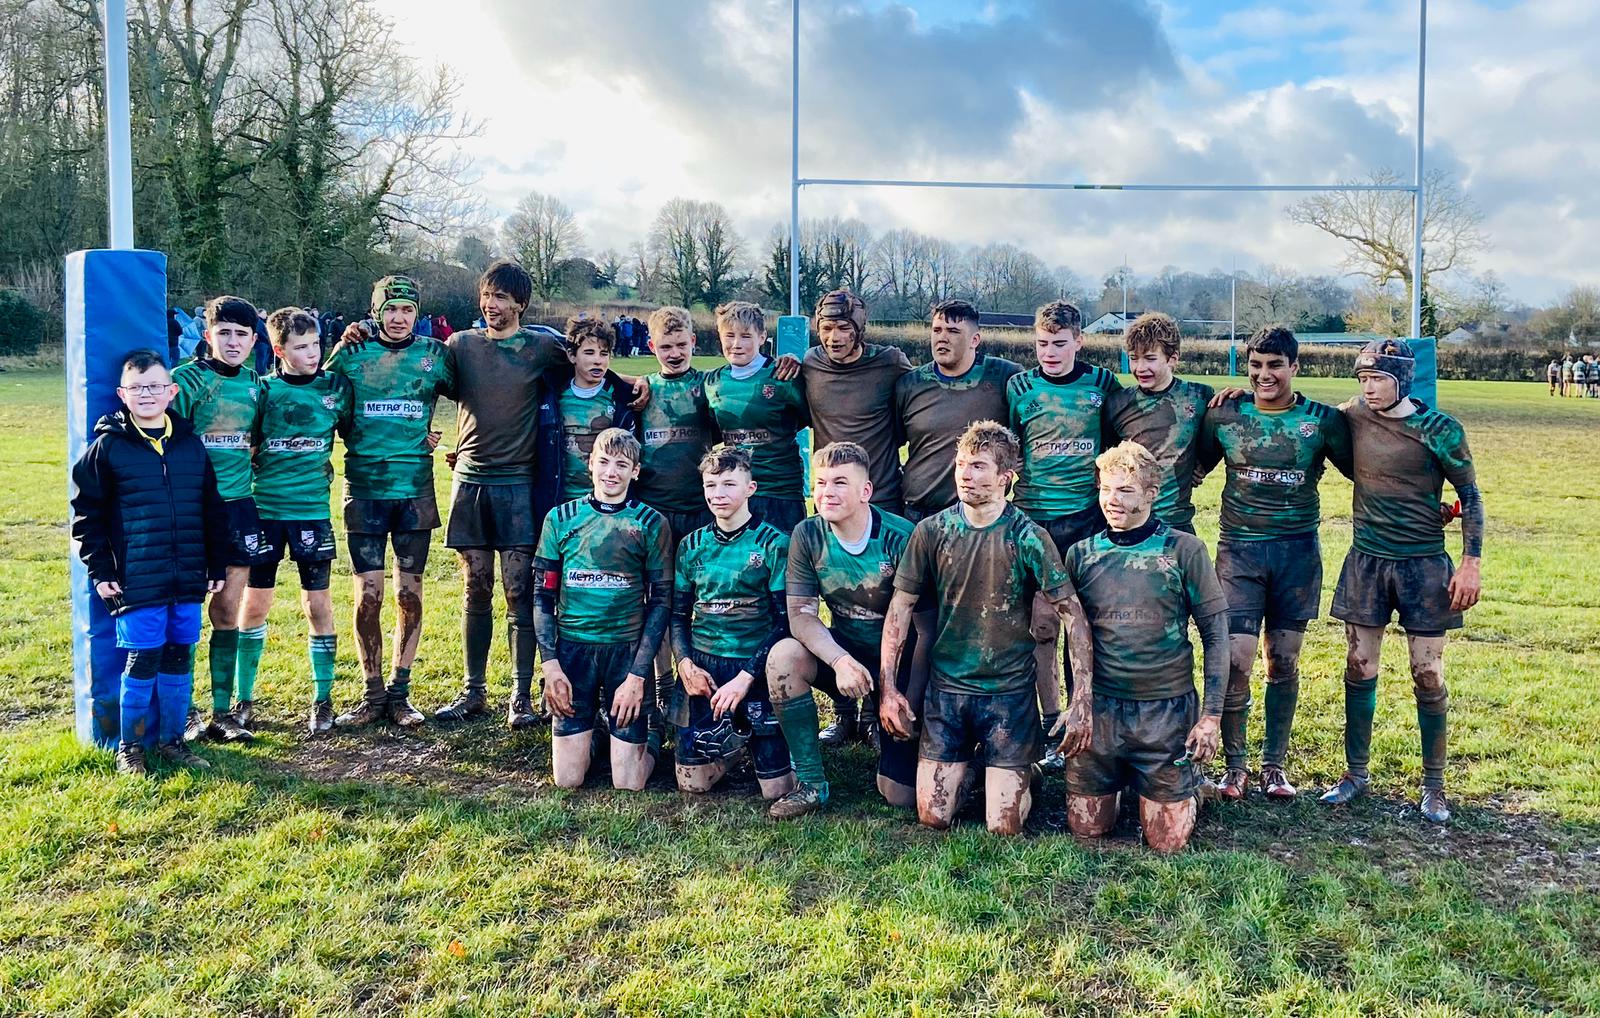 CHEW VALLEY U15’S RUGBY TEAM CONTINUES WINNING RUN – METRO ROD BRISTOL PROUDLY SPONSORS